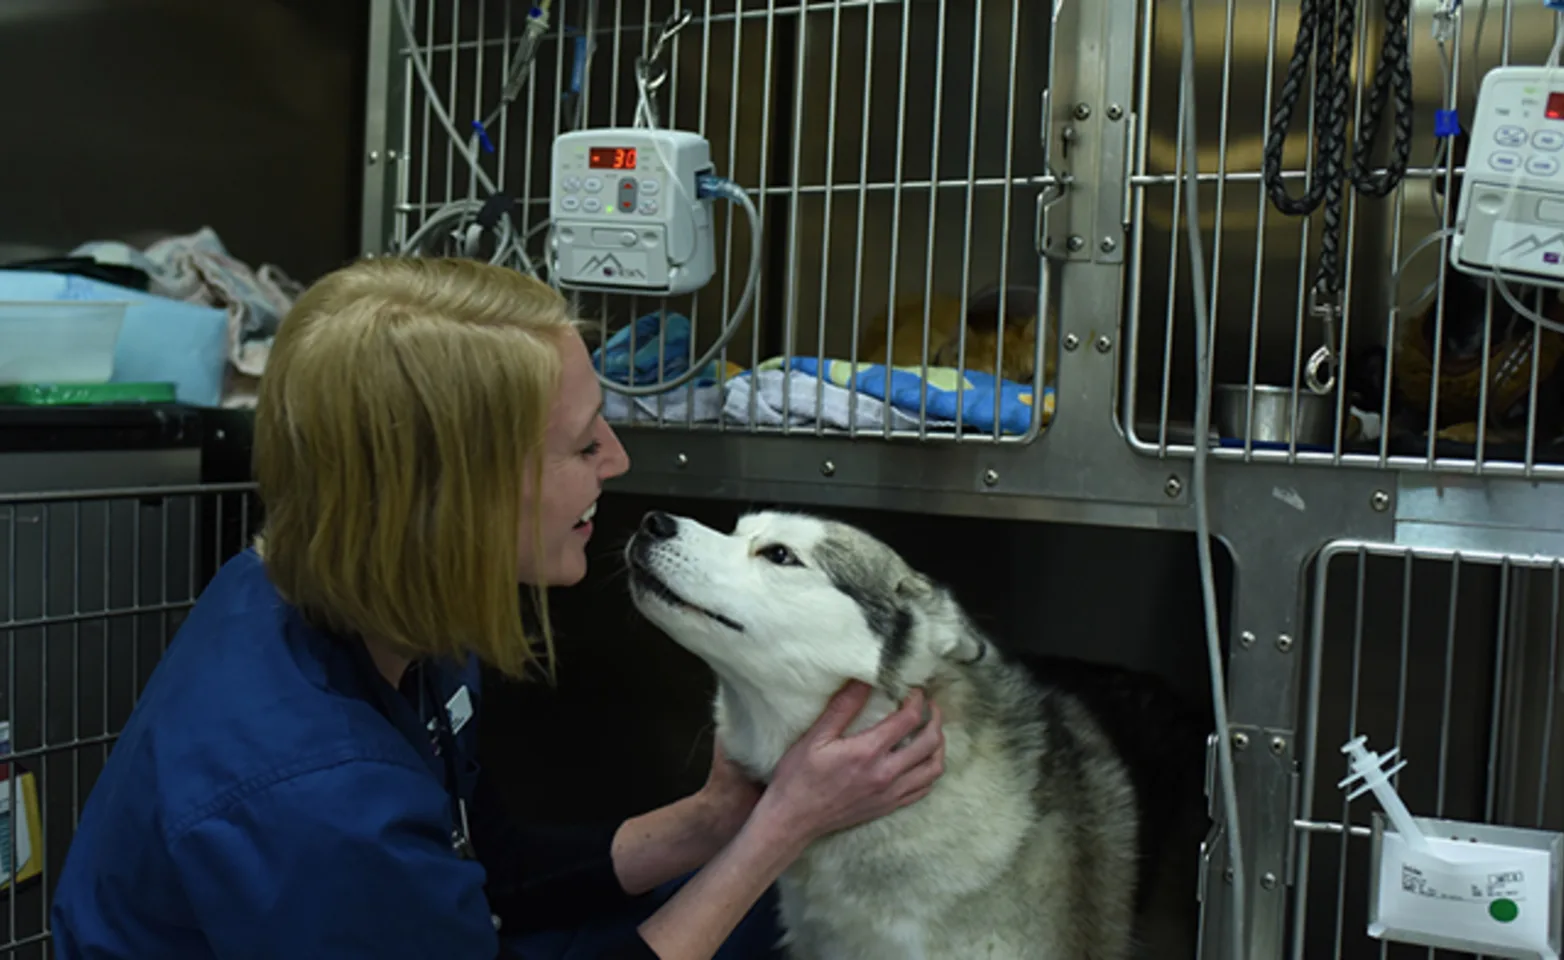 A staff member greets a dog in a kennel at VESH